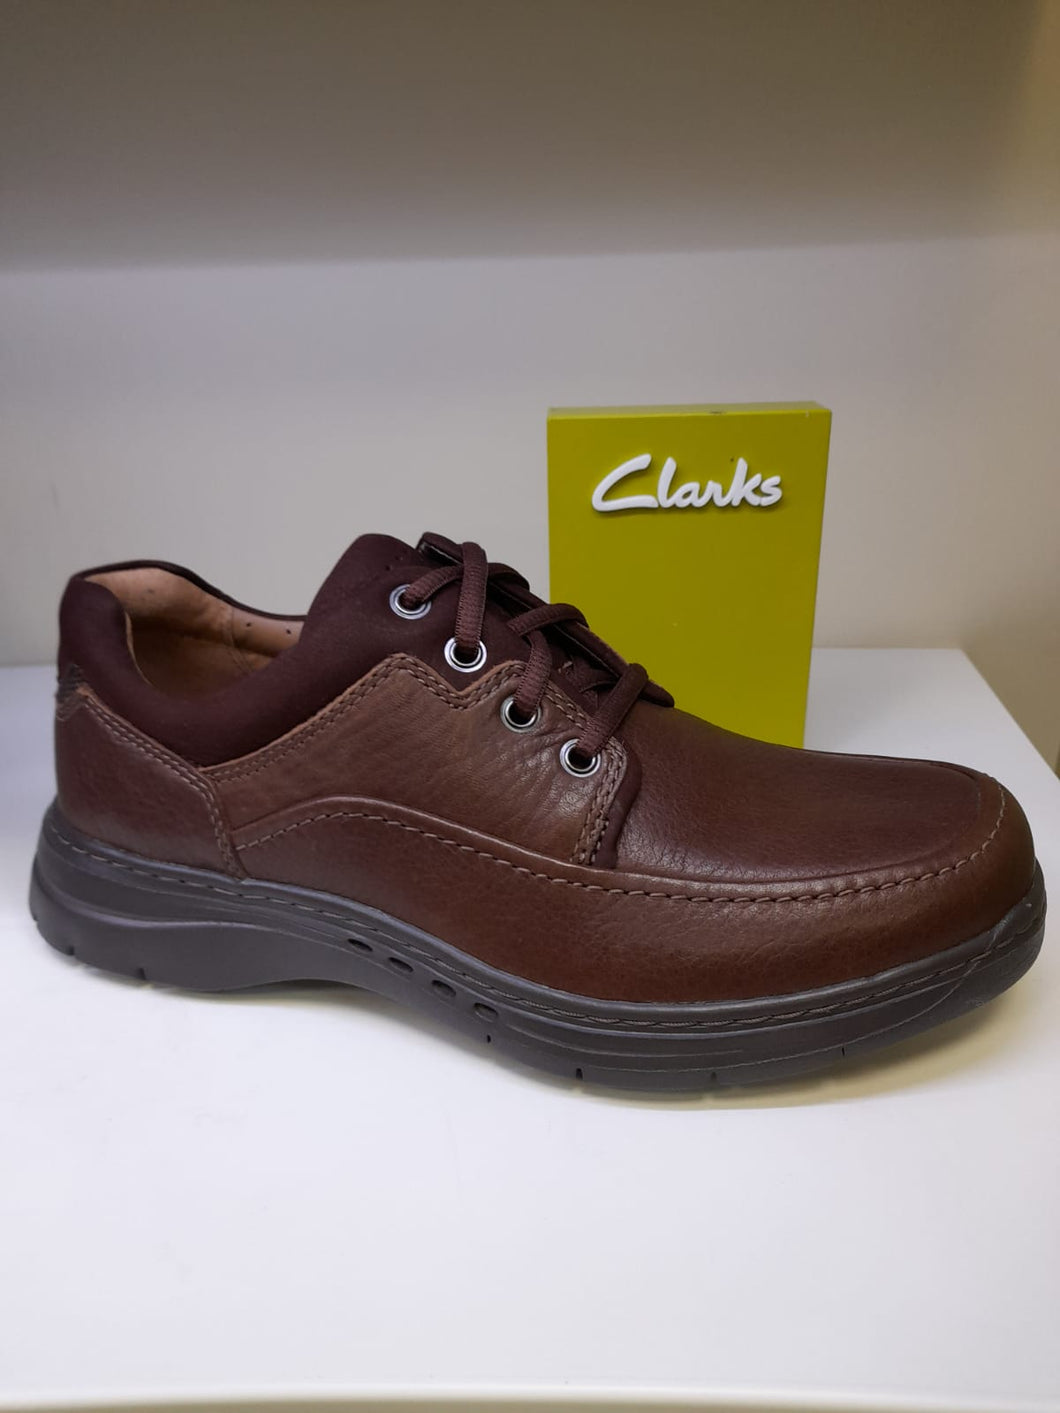 Clarks Men's Brown Leather Unstructured Shoe - Removable Insole - Wide H Fit - UnBrawley Lace